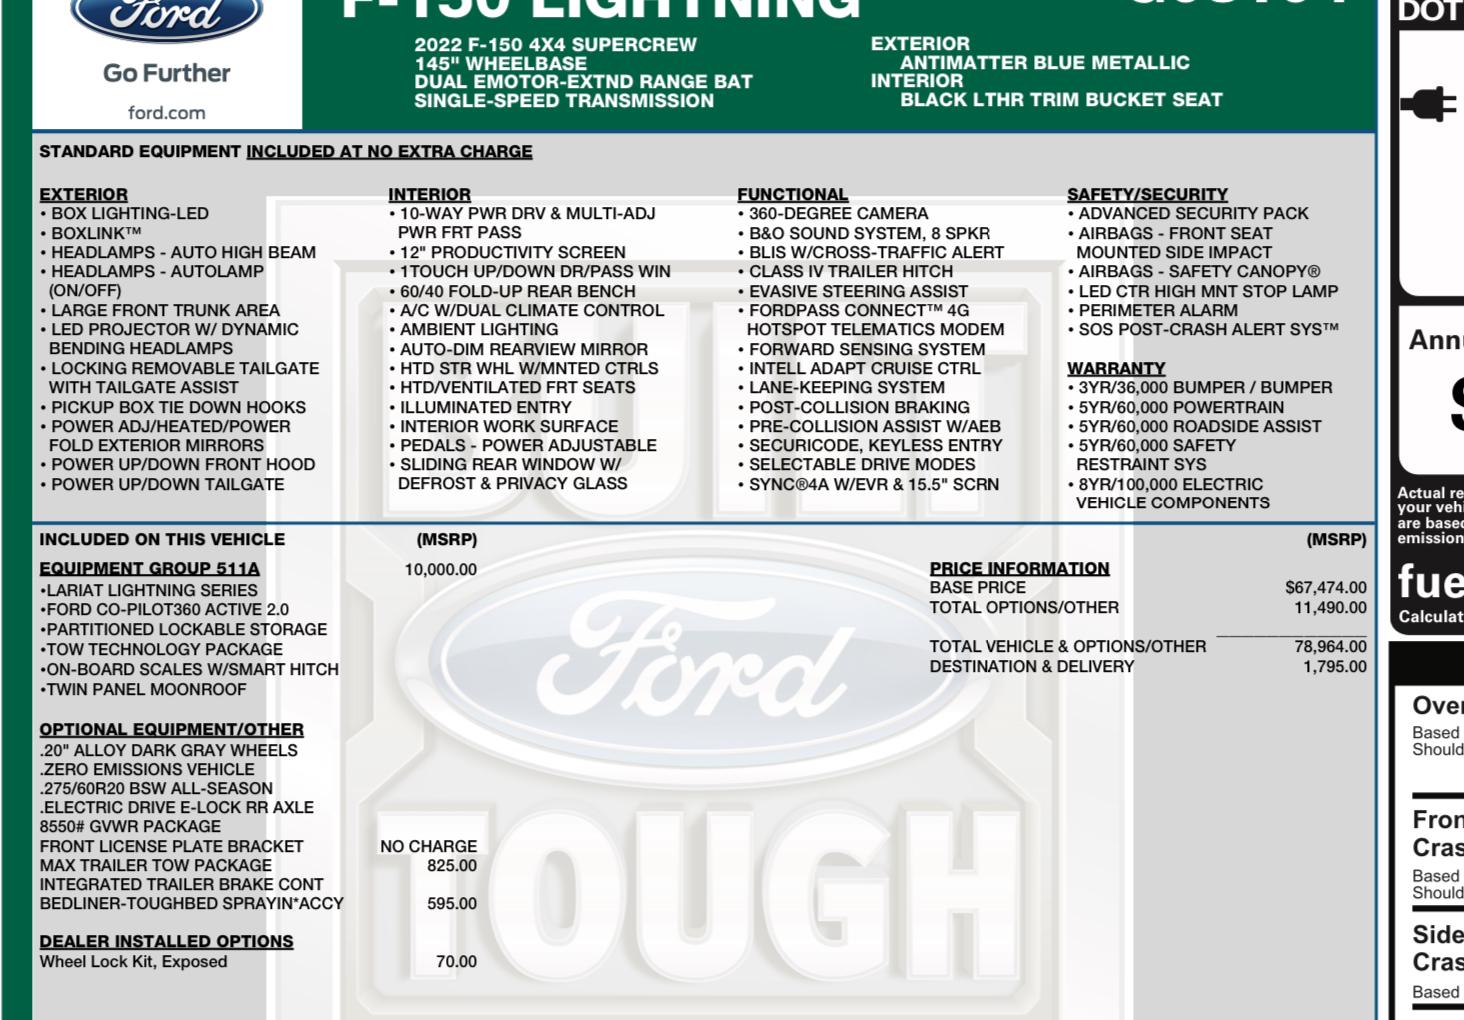 Ford F-150 Lightning BlueCruise Subscription Price Increased to $800/yr for All Renewals IMG_2975